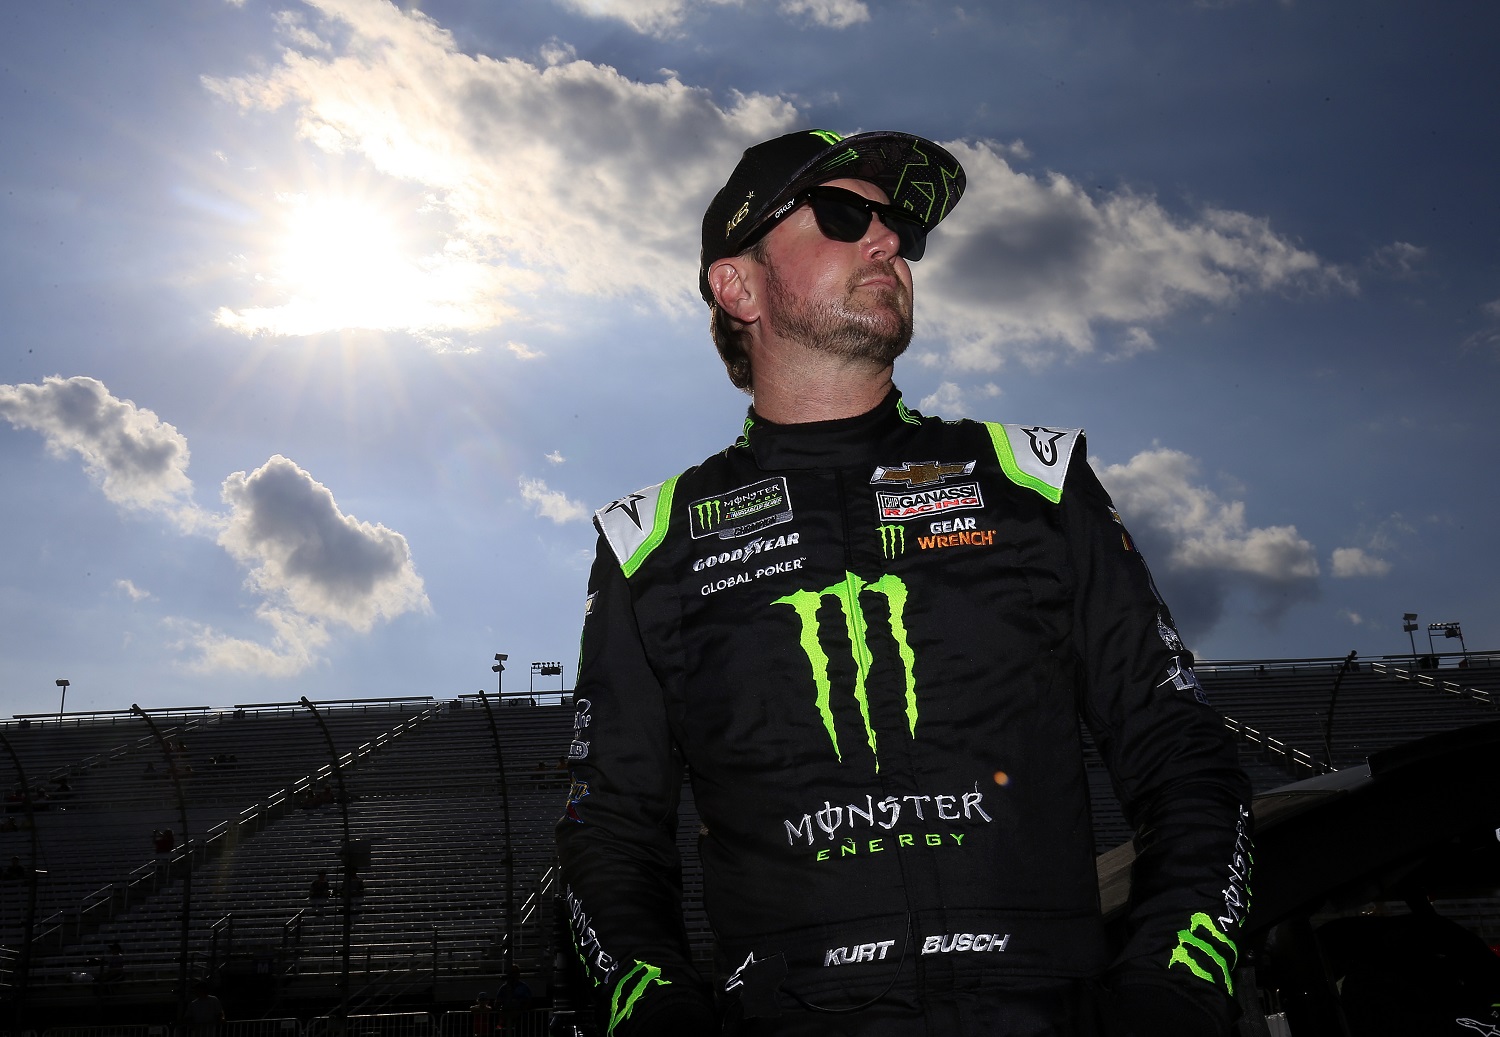 Kurt Busch, driver of the Monster Energy Chevrolet, stands by his car during qualifying for the Monster Energy NASCAR Cup Series Foxwoods Resort Casino 301 on July 19, 2019.